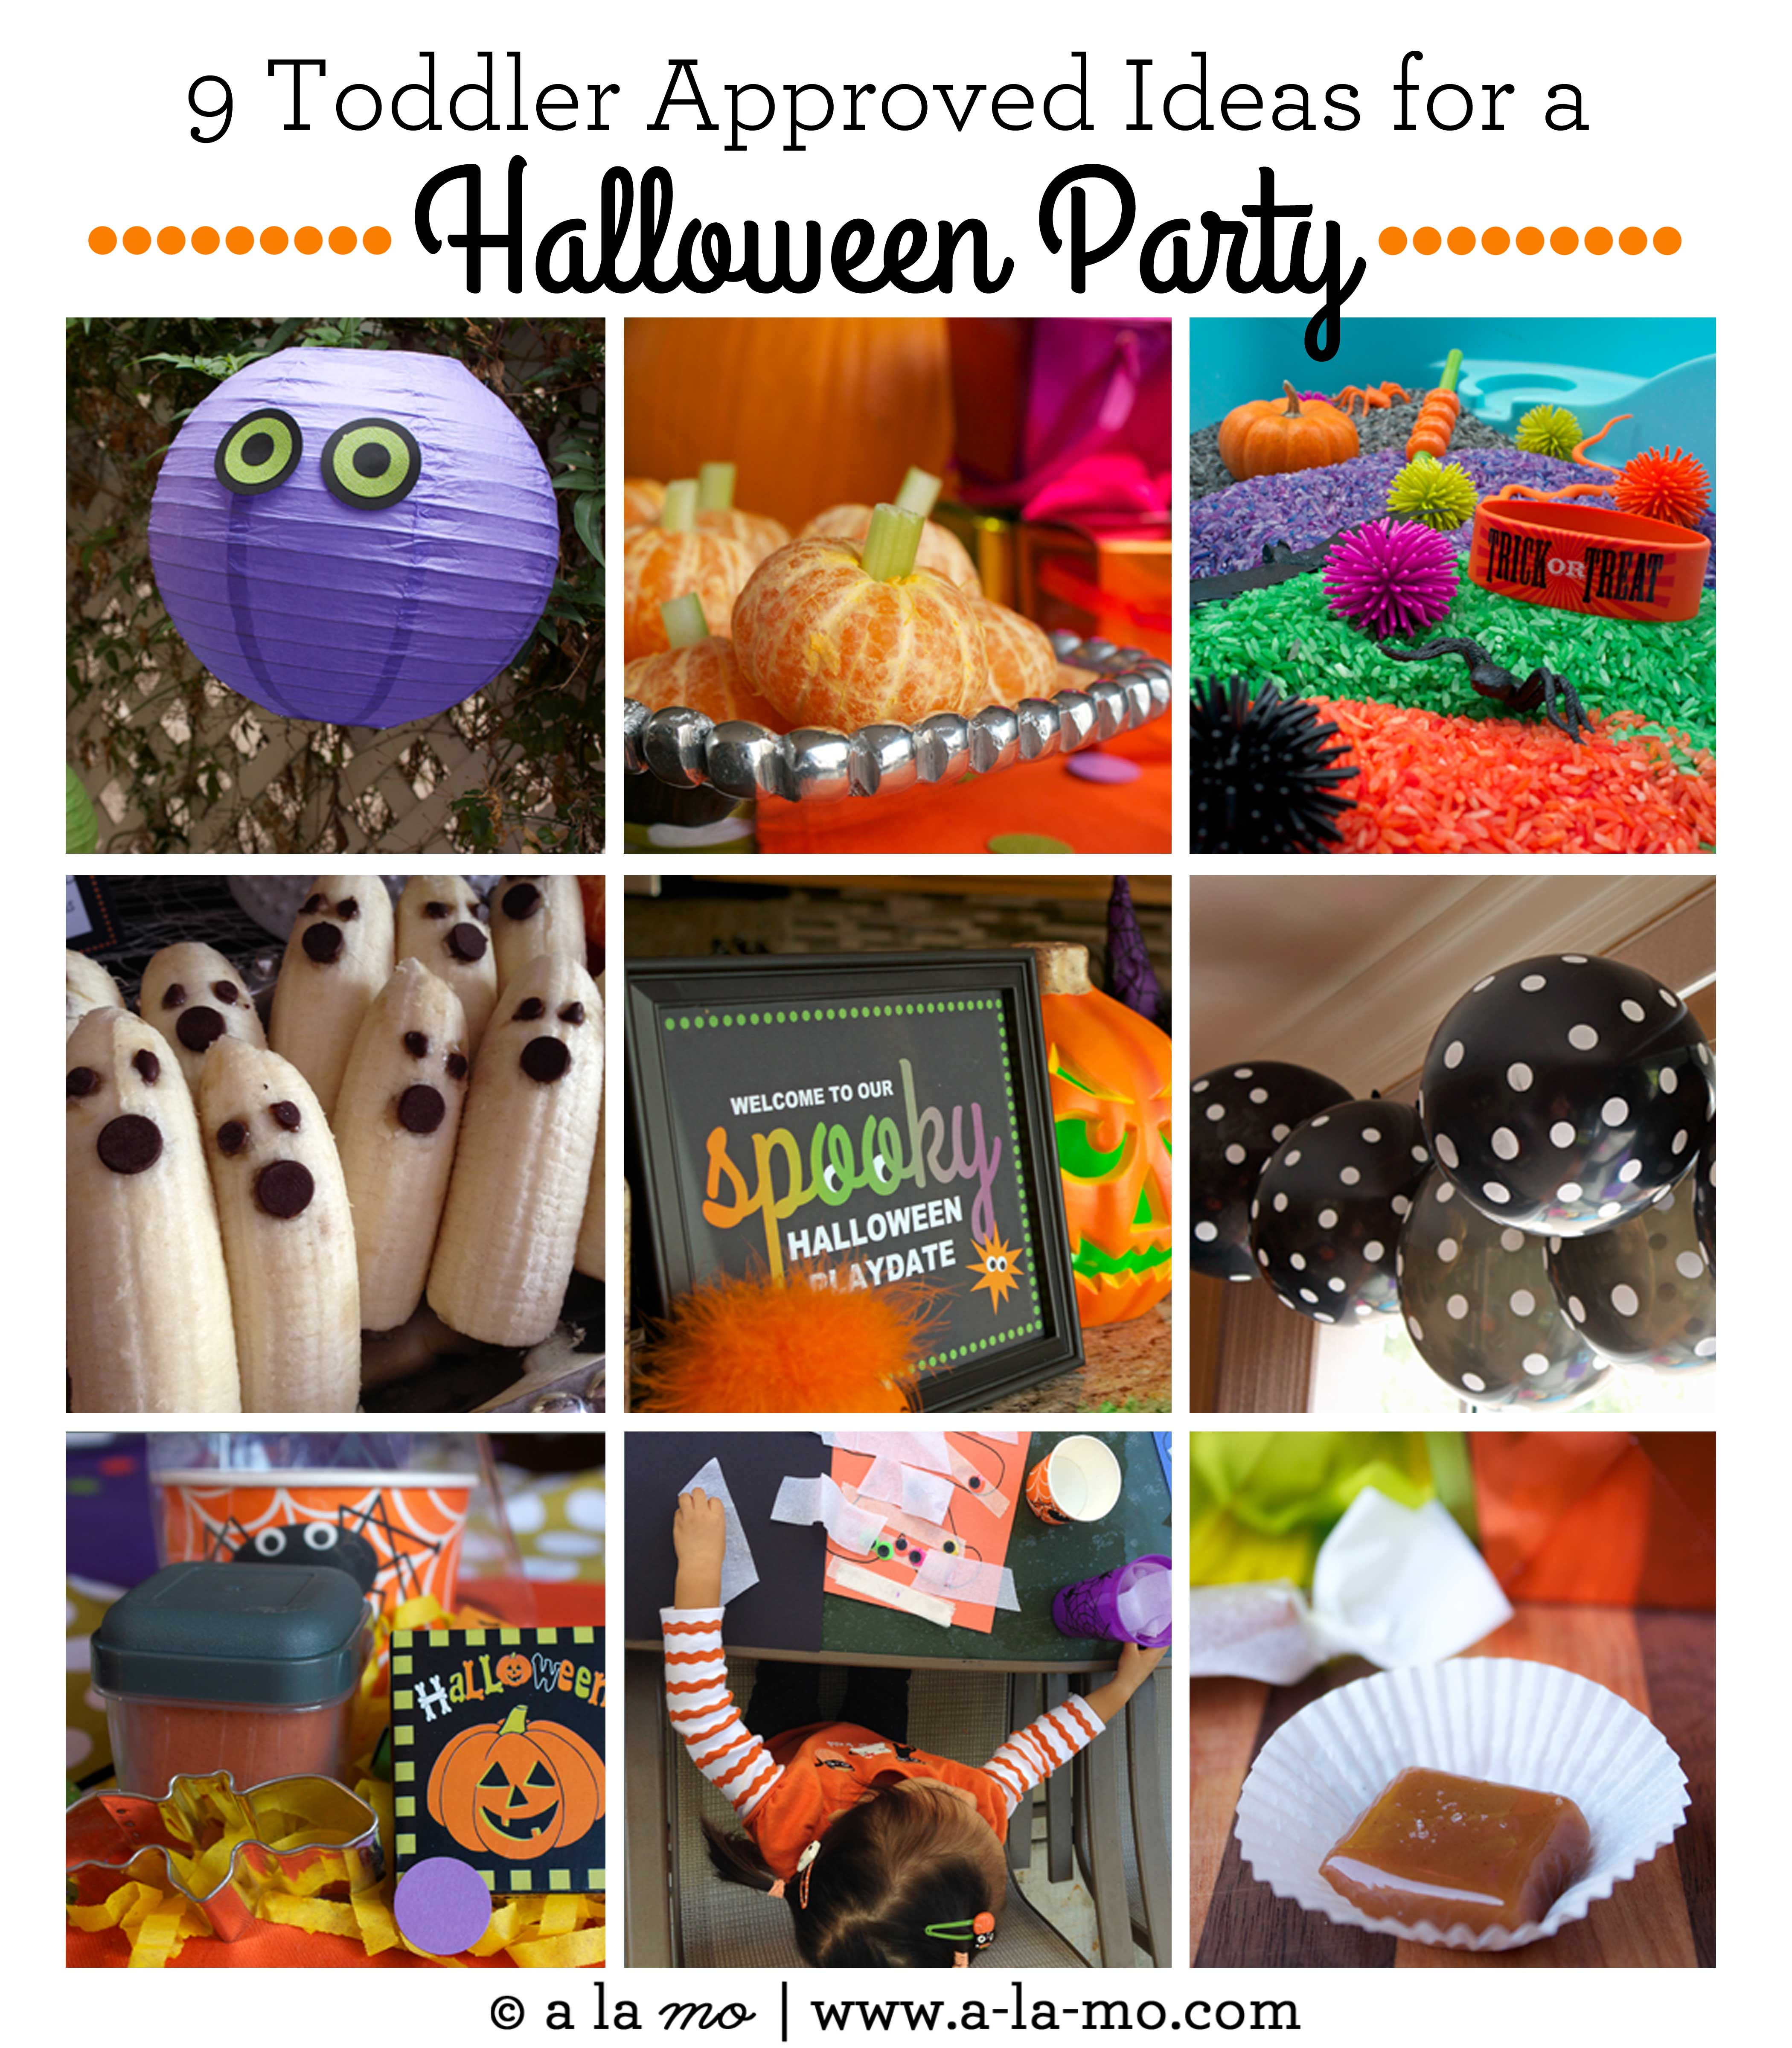 Toddler Halloween Birthday Party Ideas
 Spooky Toddler Playdate a Halloween Party